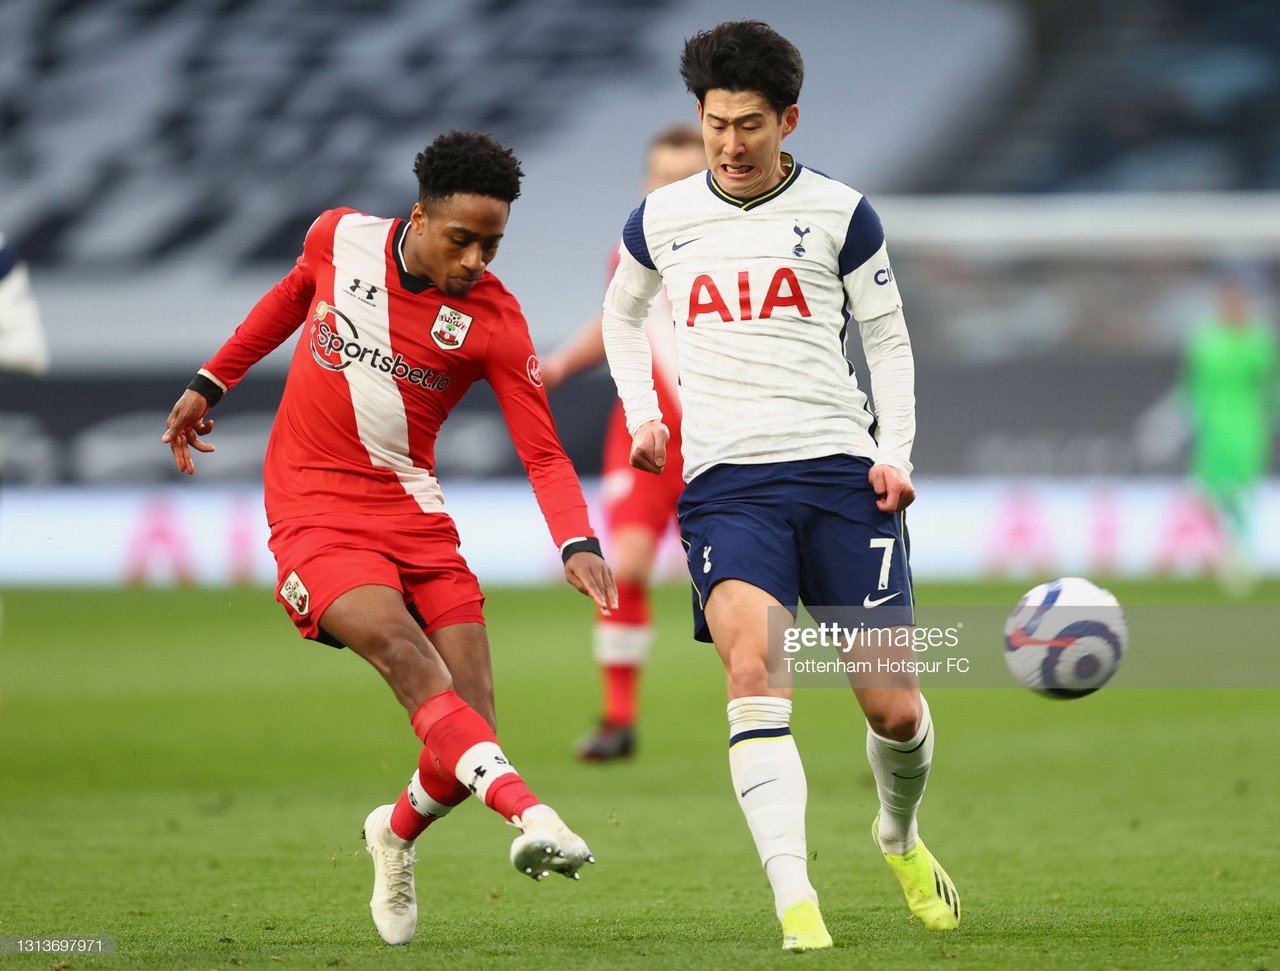 Kyle Walker-Peters: The one that got away